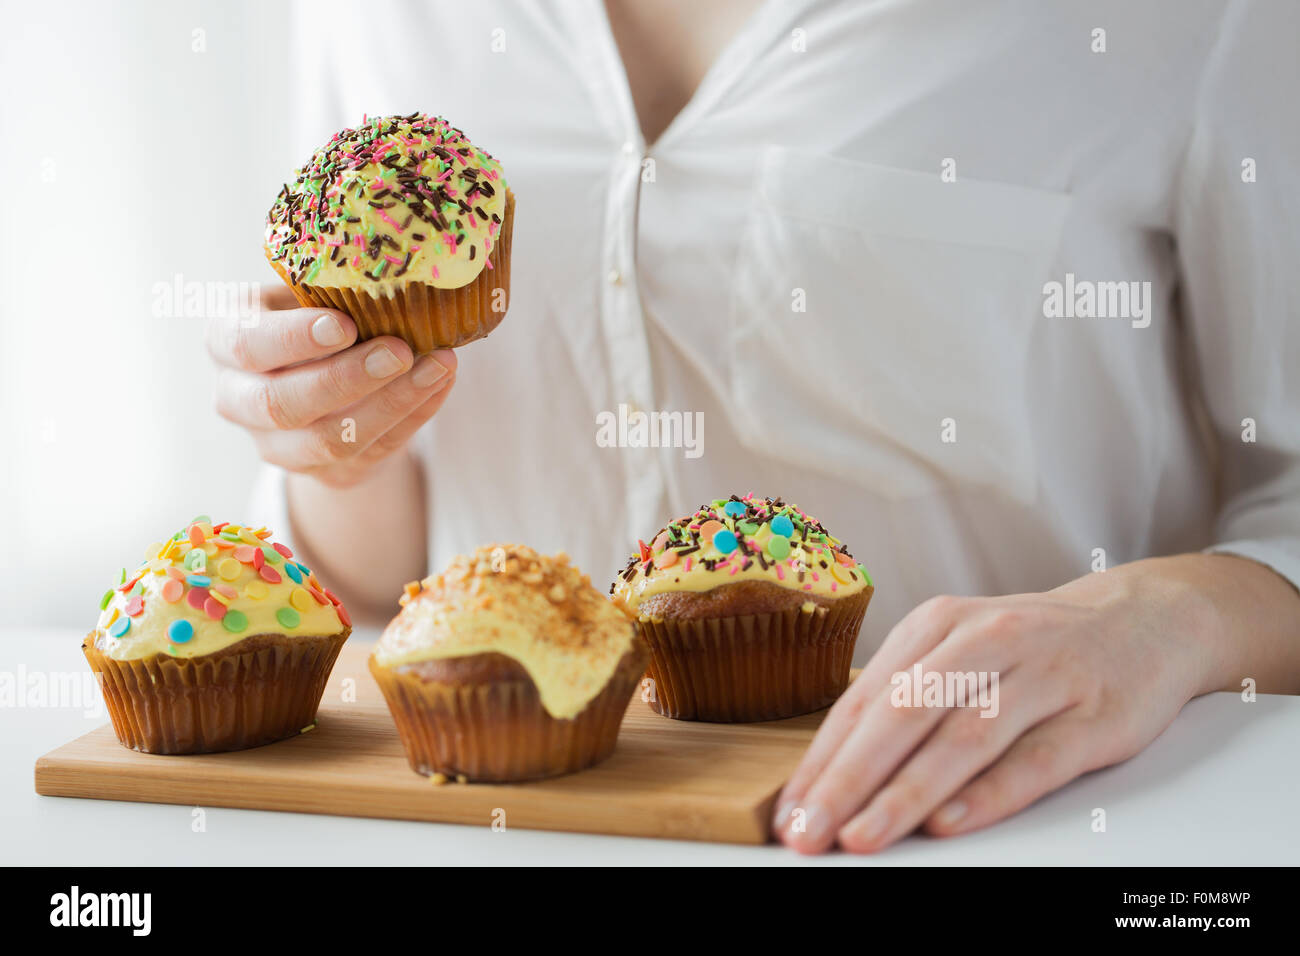 close up of woman with glazed cupcakes or muffins Stock Photo